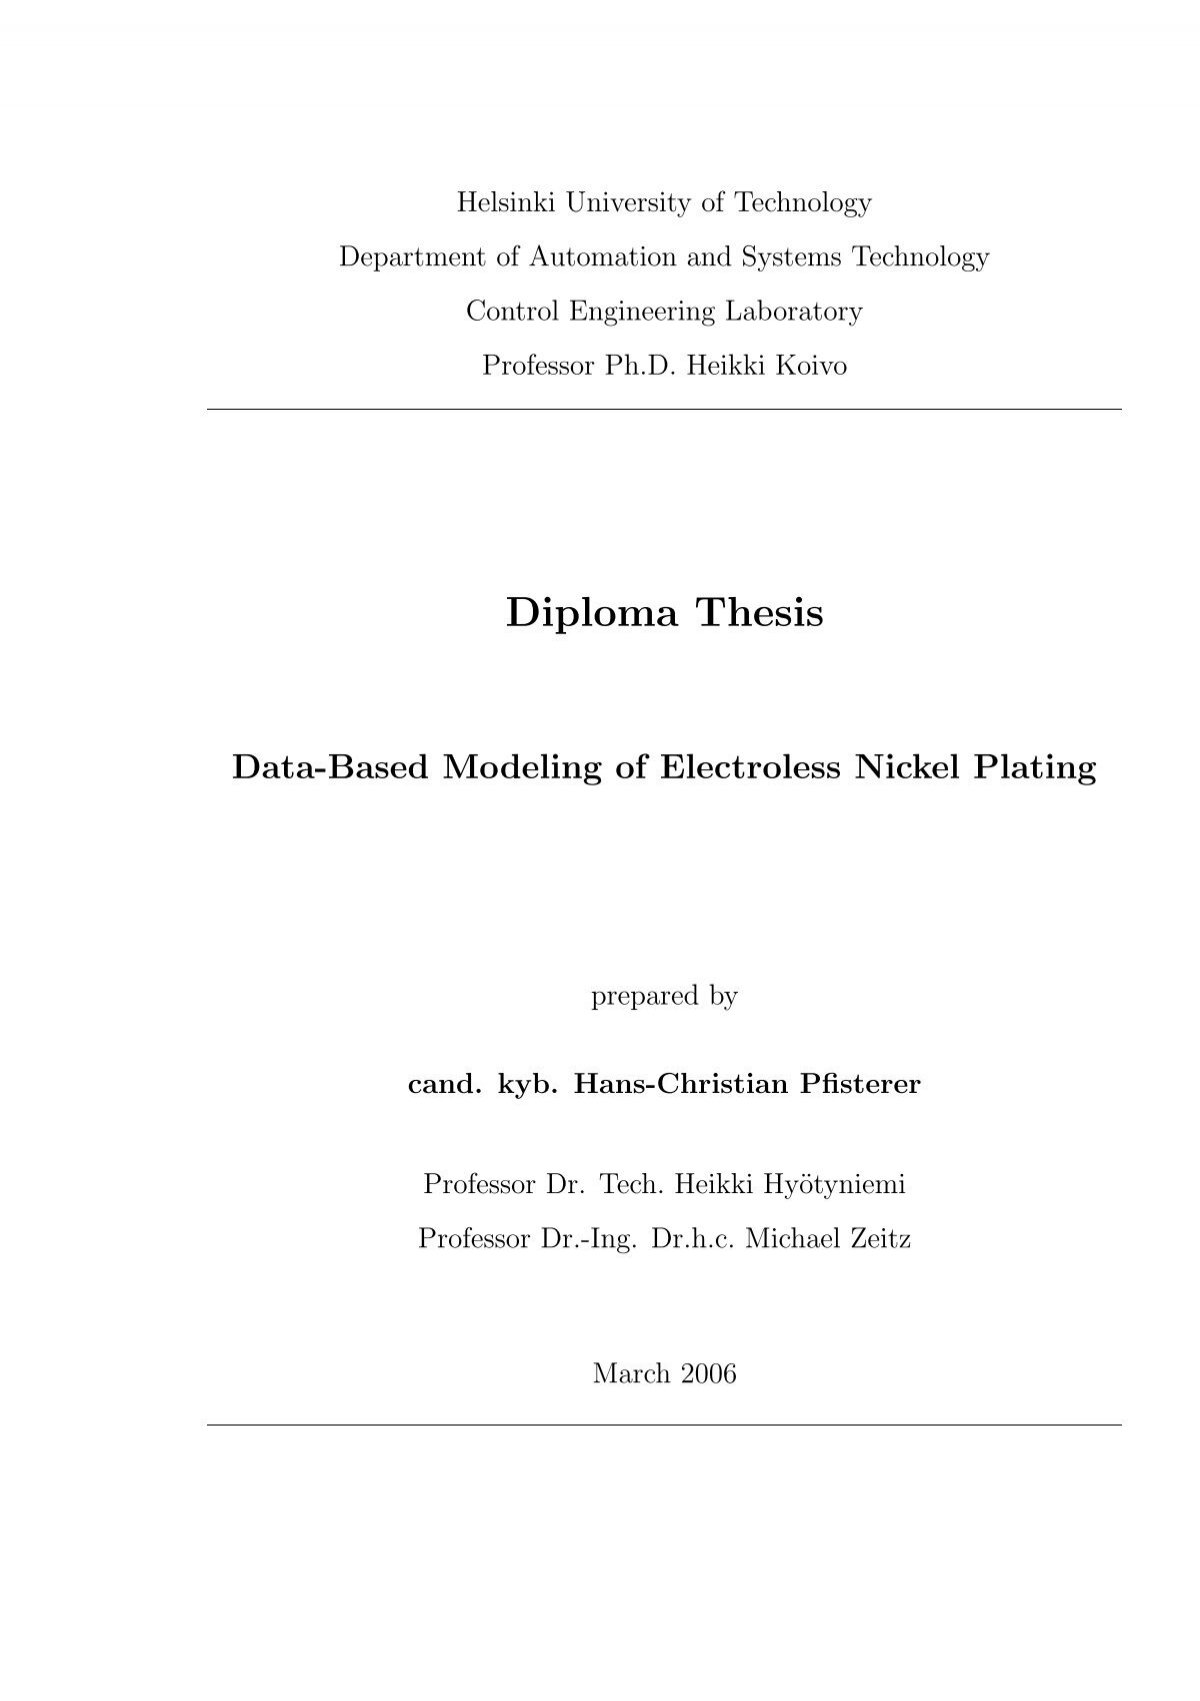 how to write a diploma thesis